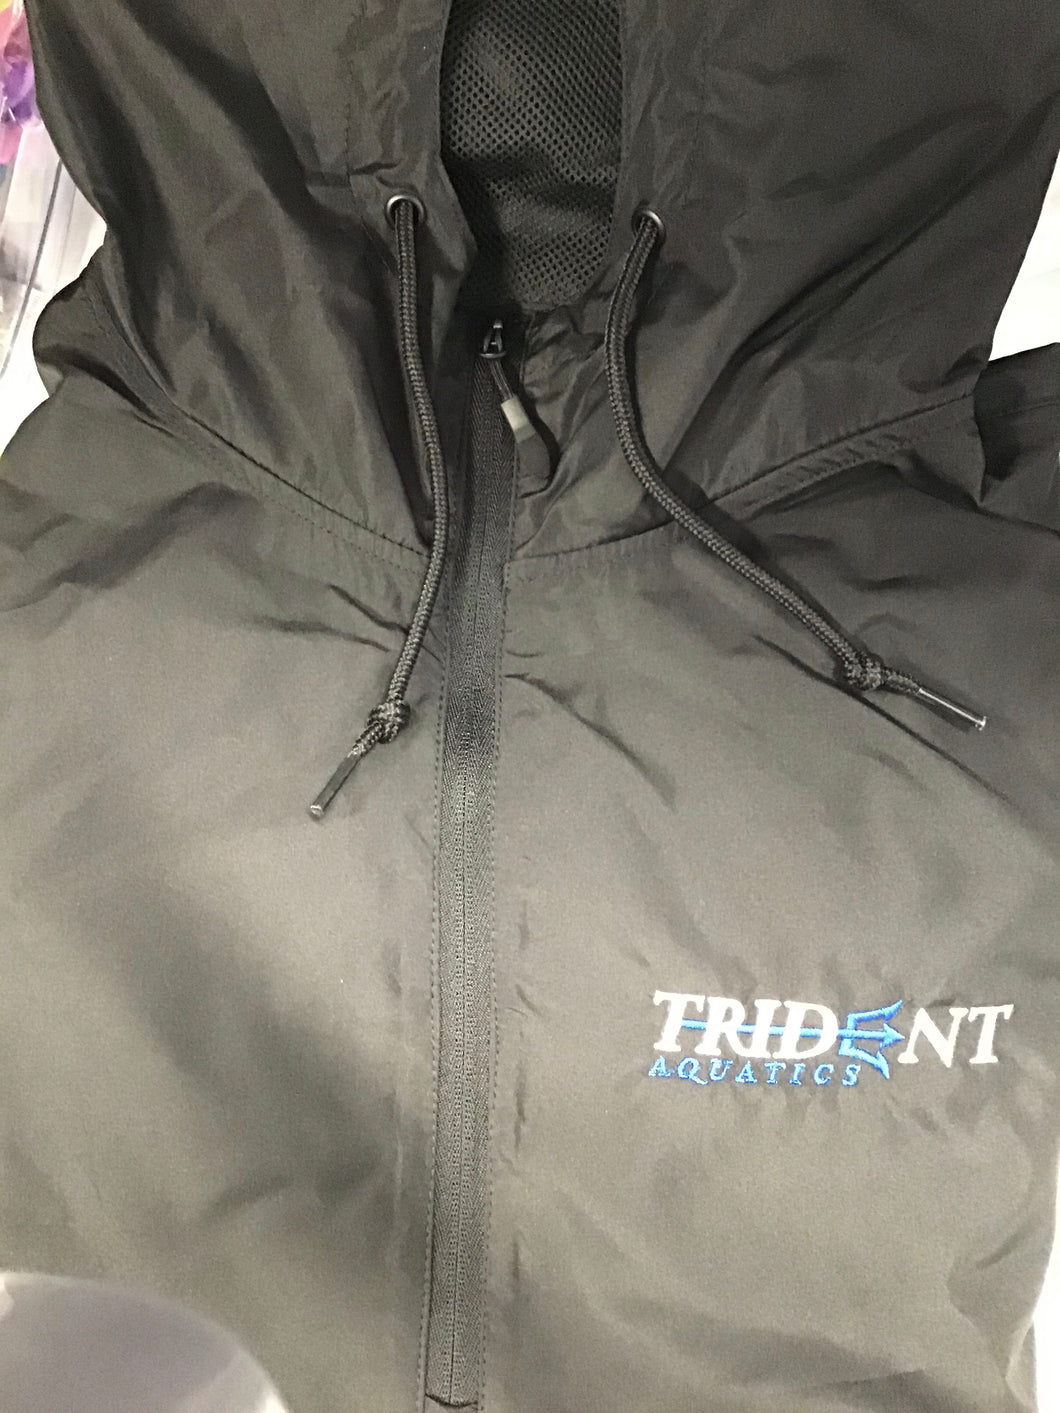 Trident 1/4 zip black pullover with hood